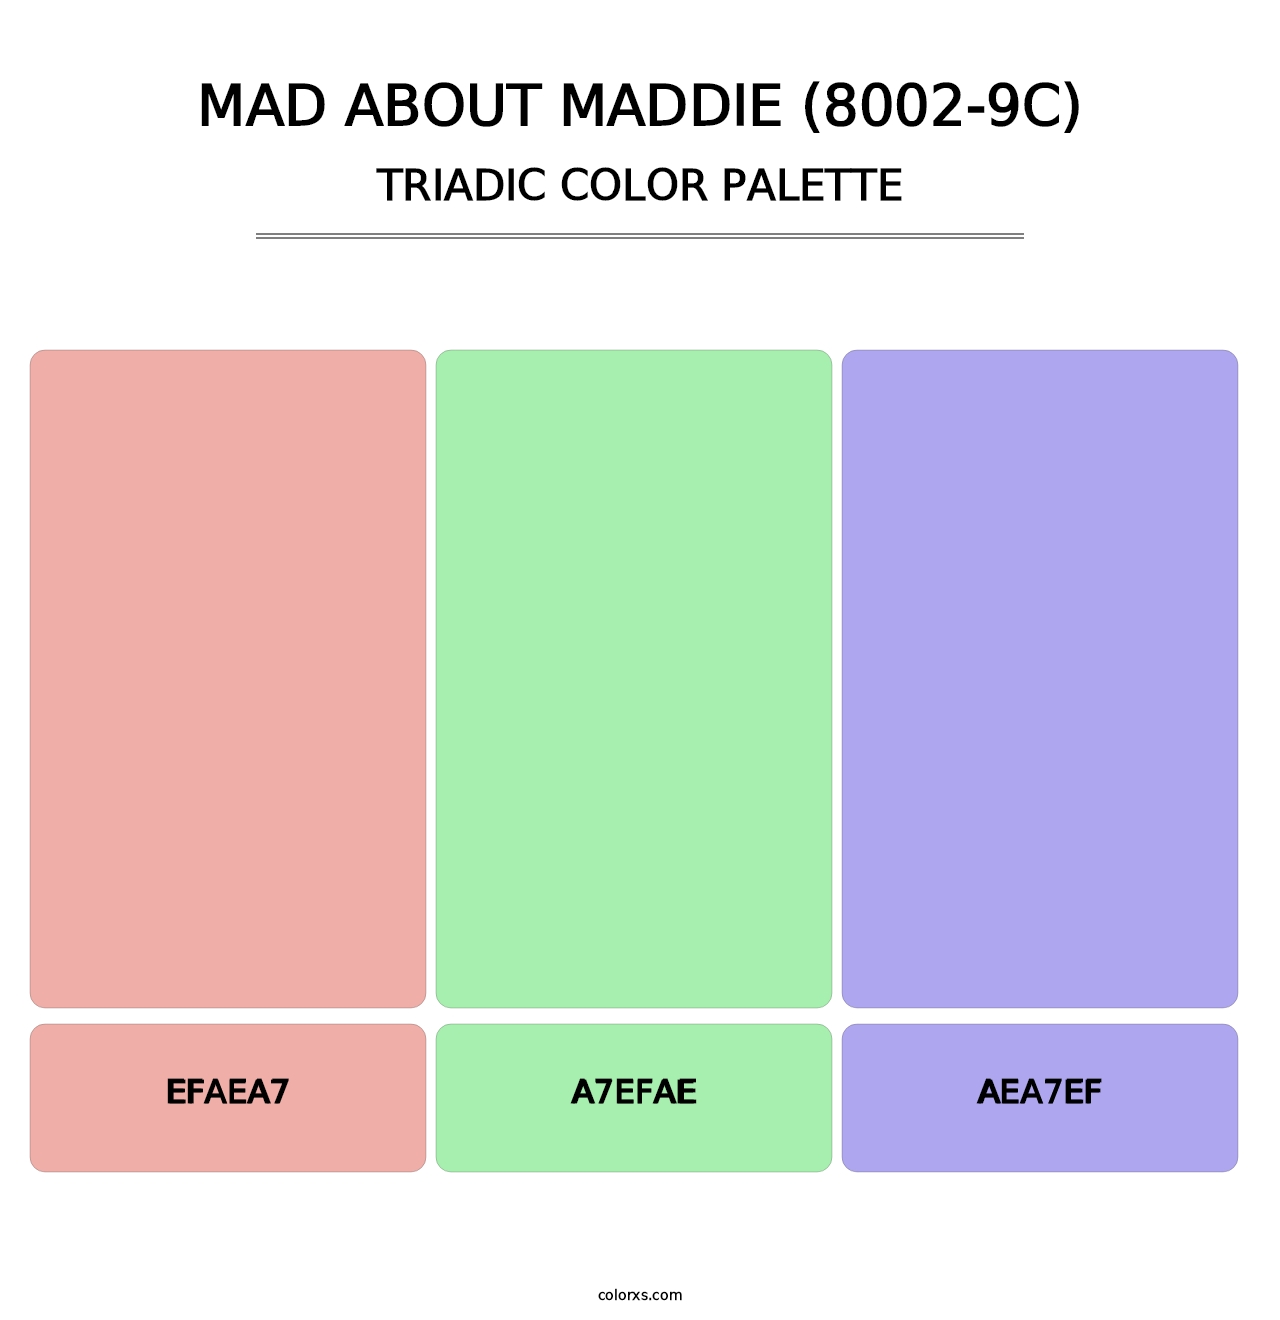 Mad About Maddie (8002-9C) - Triadic Color Palette